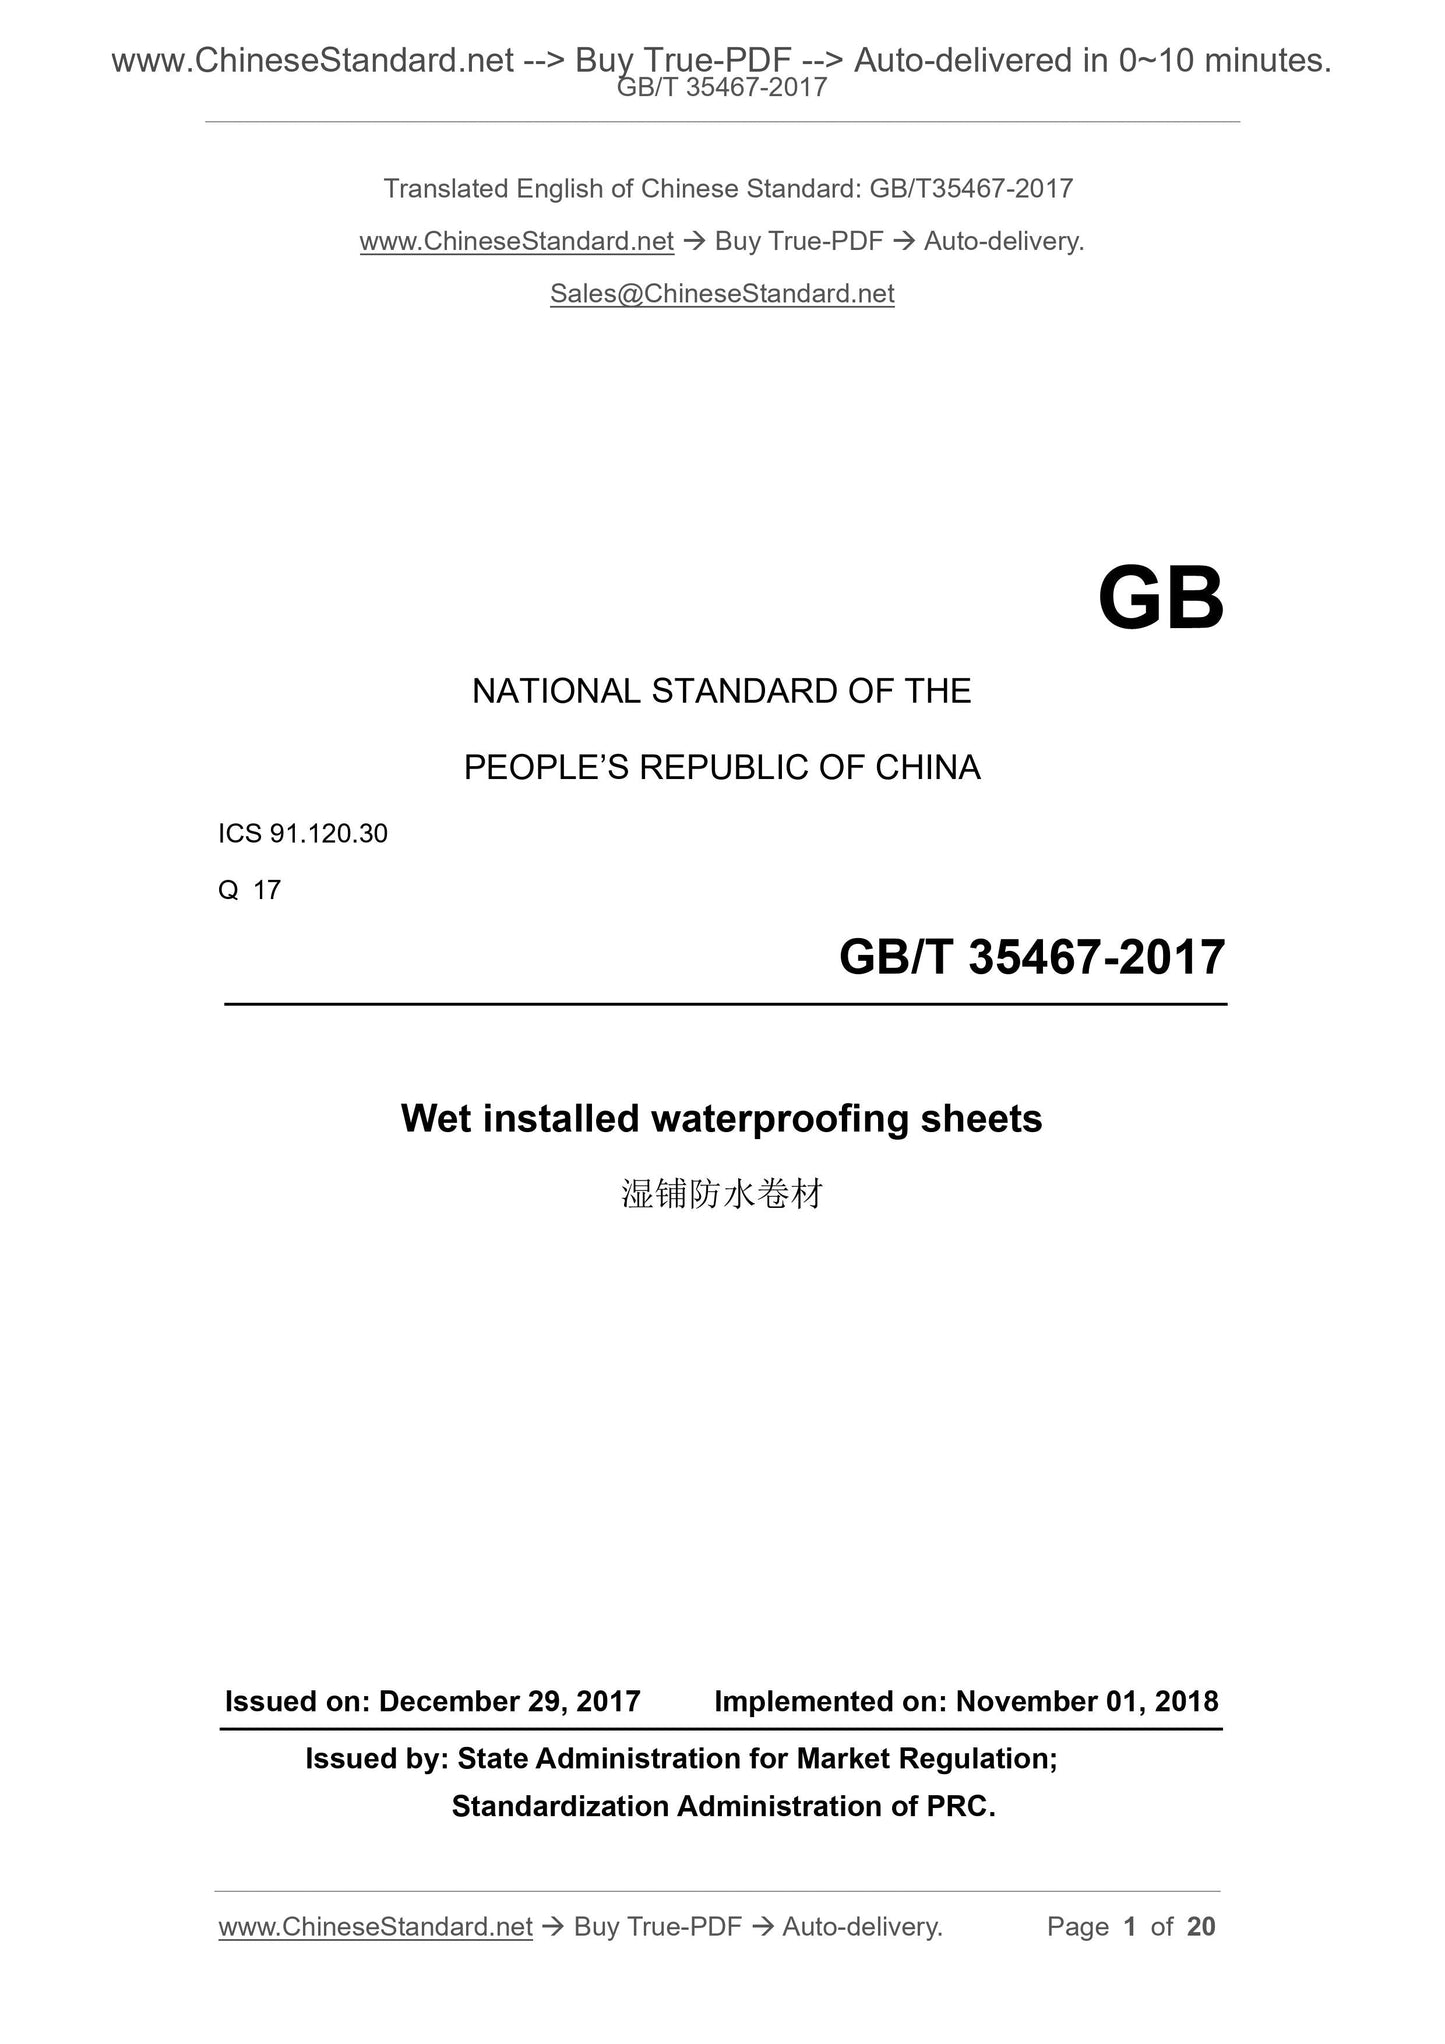 GB/T 35467-2017 Page 1